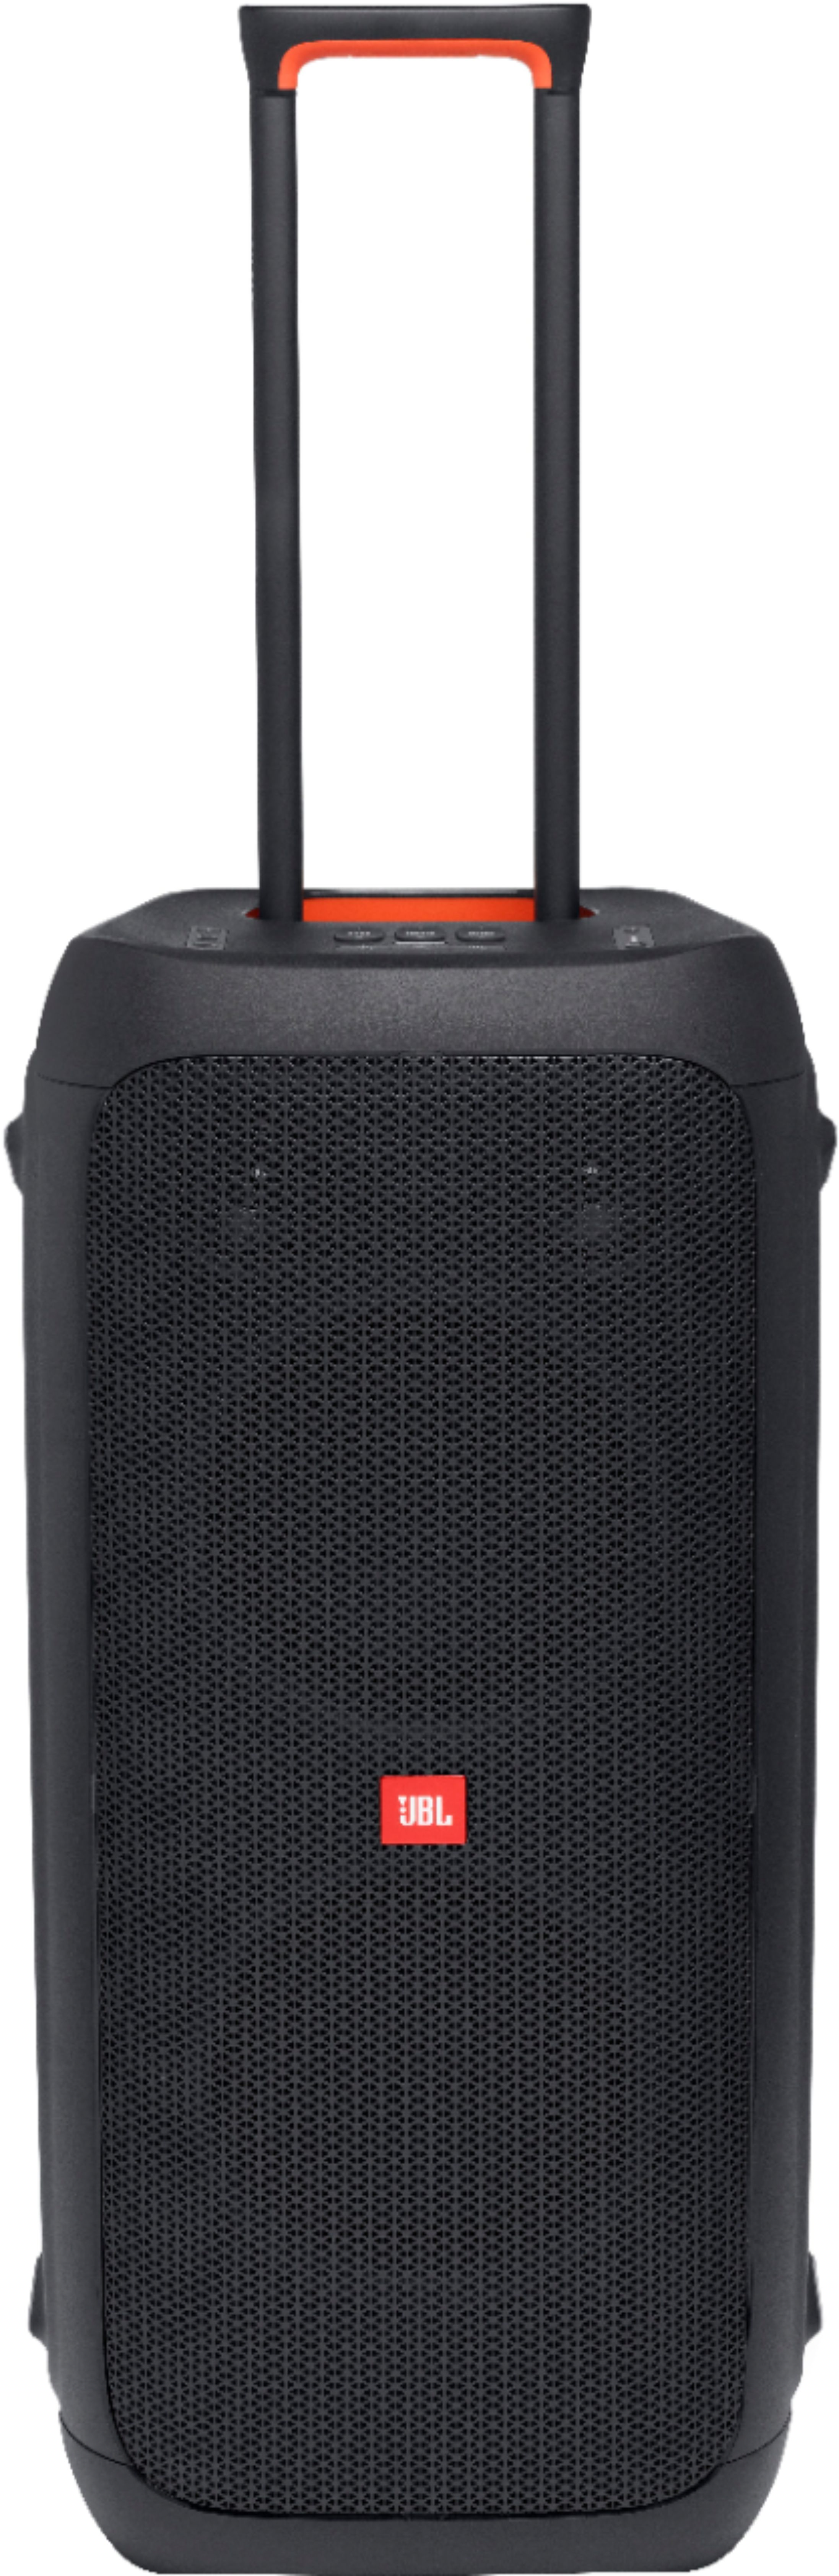 JBL PartyBox 310 Portable Bluetooth Speaker With Party Lights